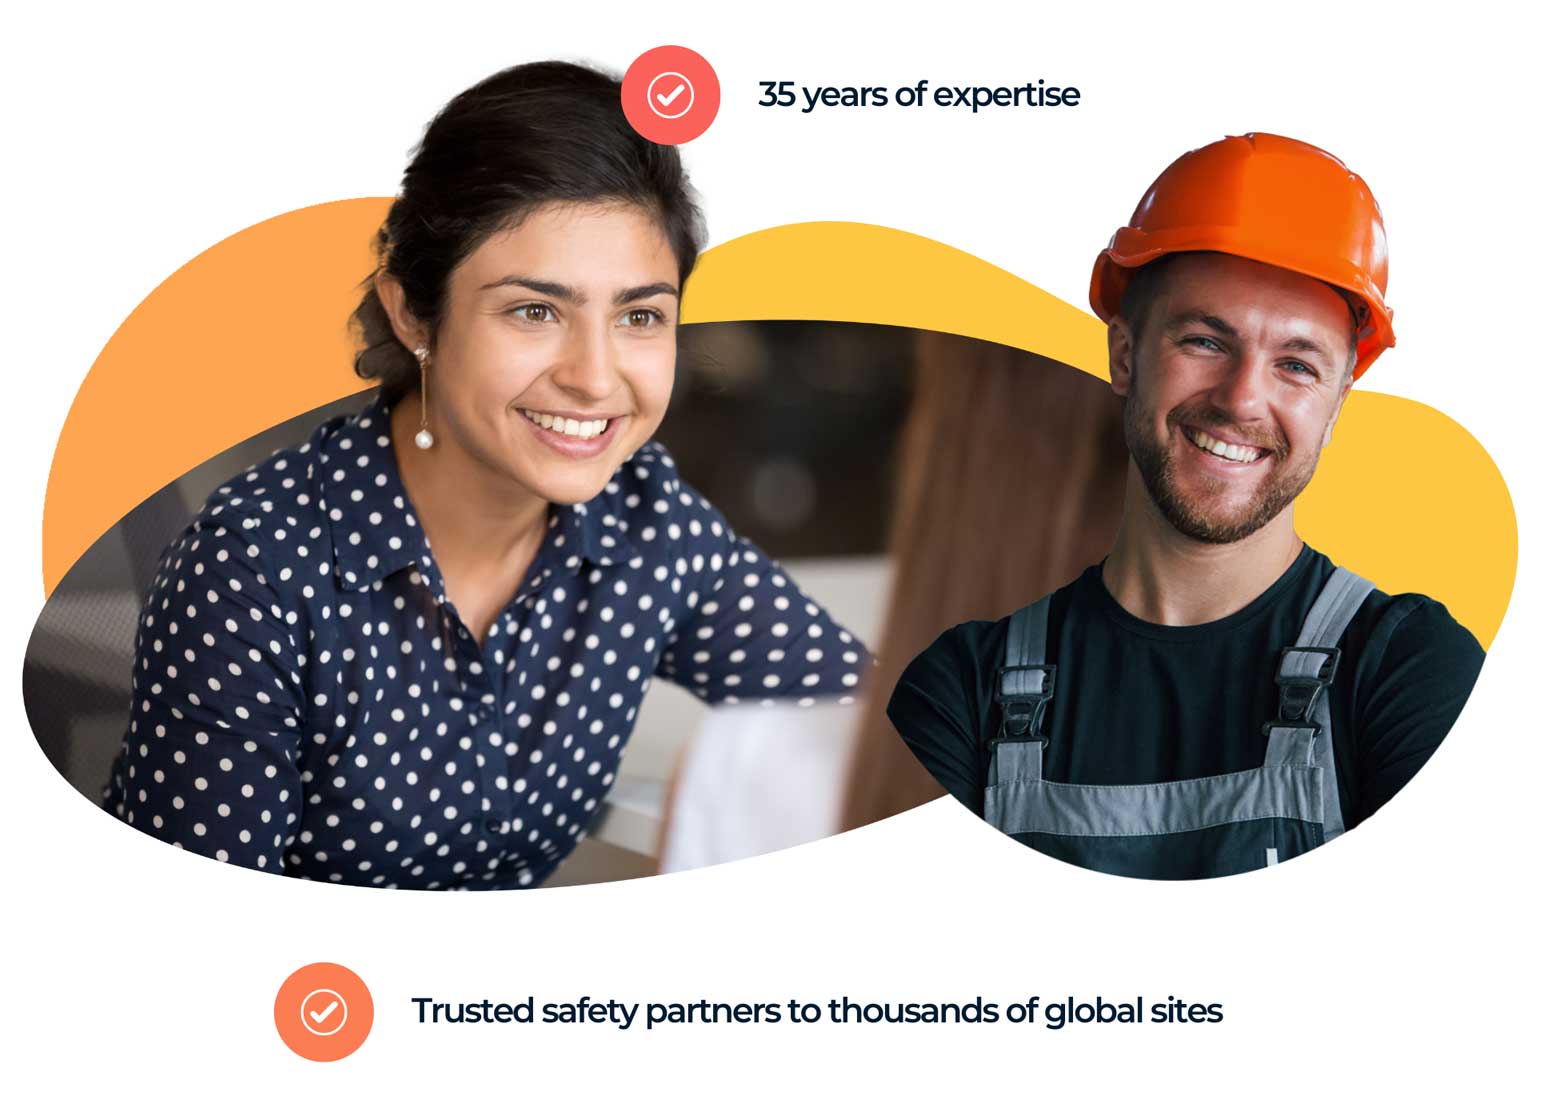 Two images, one of a woman smiling and one of a man in a construction hat